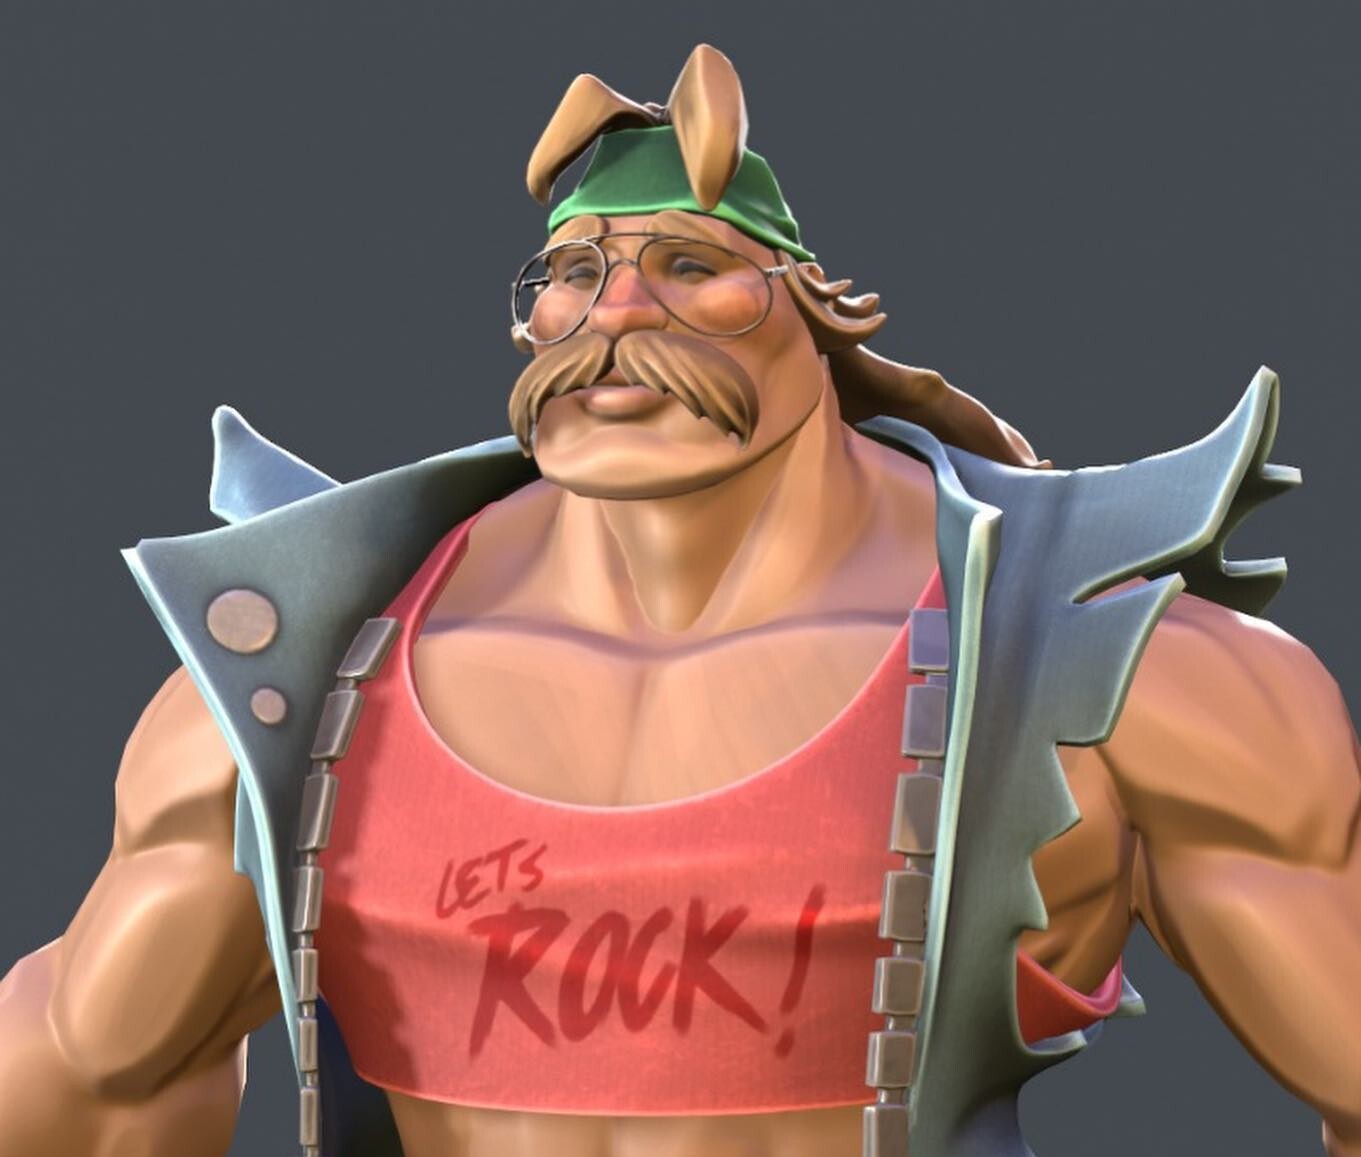 Gym Masters Character design: Rock Johnson